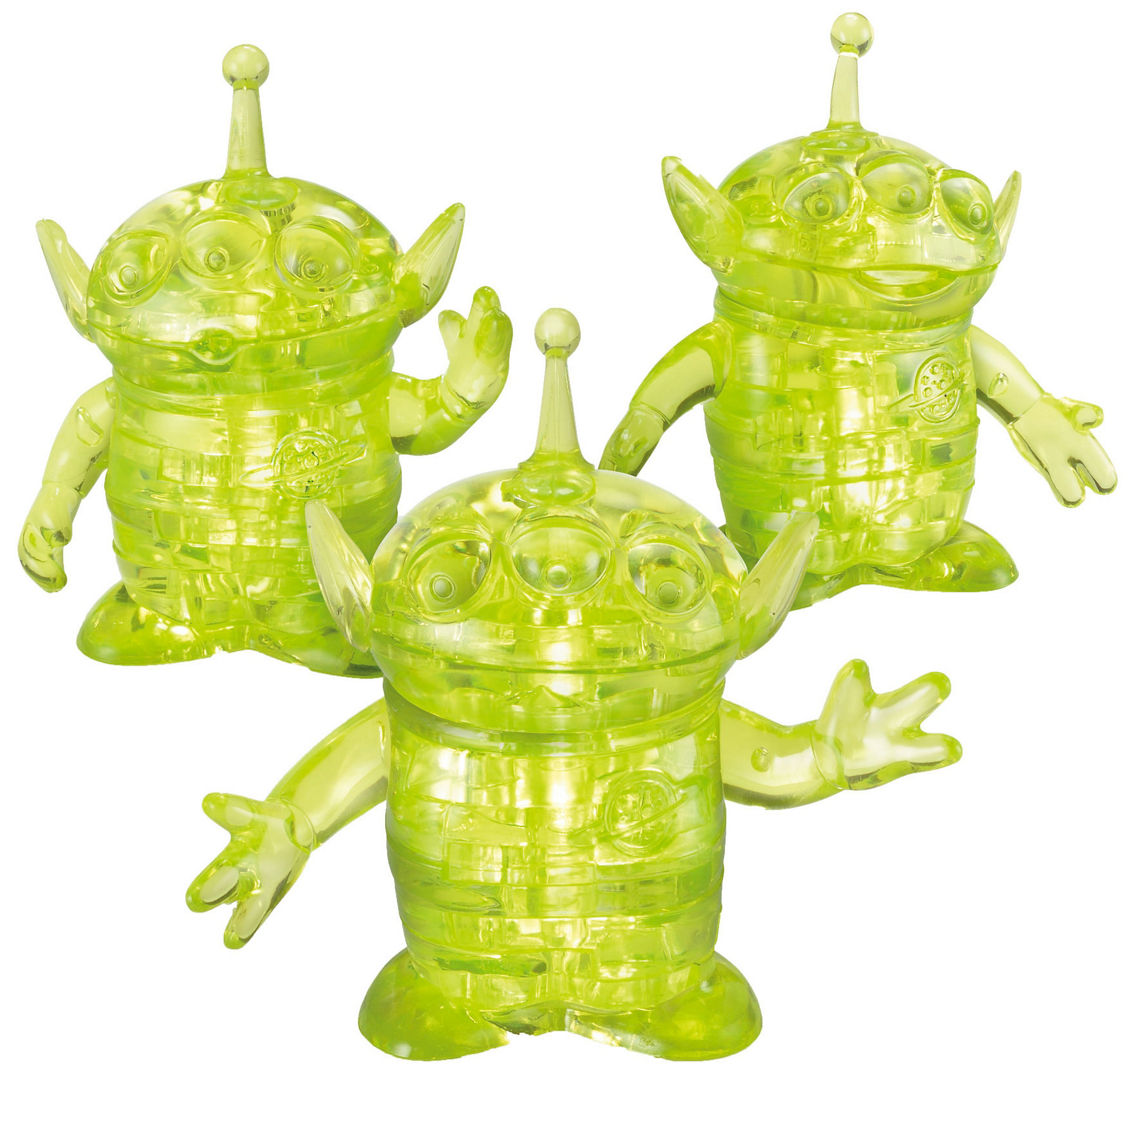 BePuzzled 3D Crystal Puzzle - Disney Toy Story 4 - Aliens: 51 Pcs - Image 2 of 2